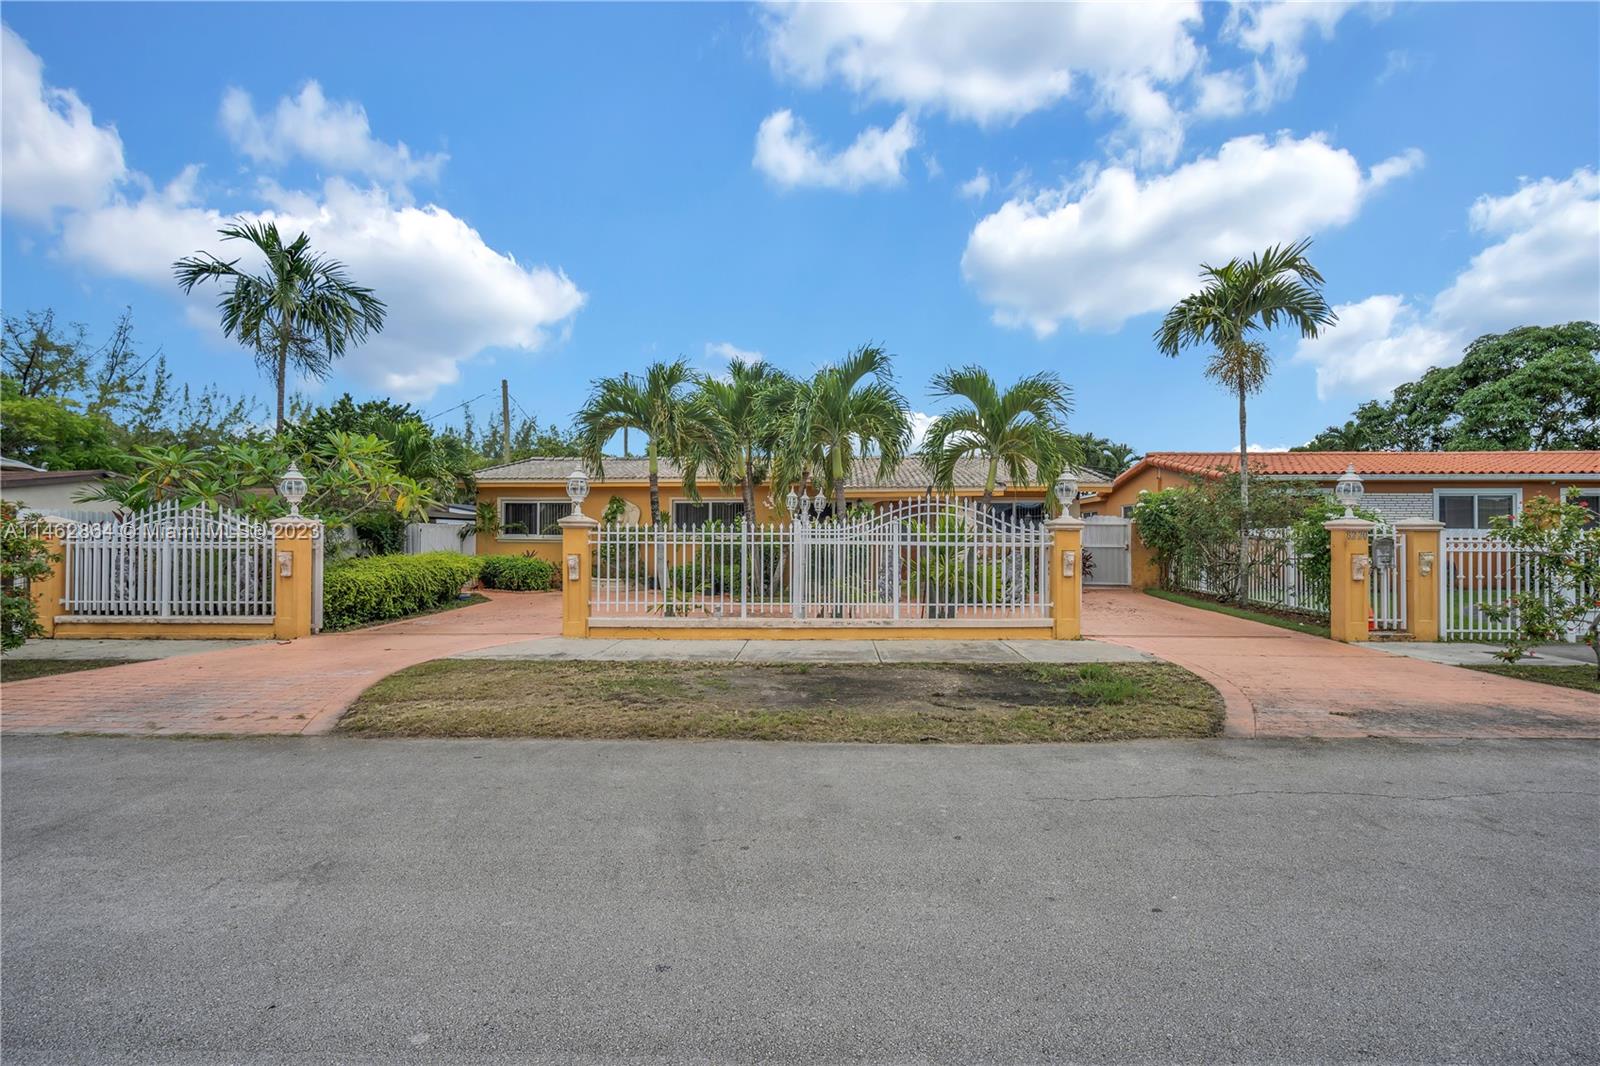 8220 SW 45th St, Miami, Florida 33155, 3 Bedrooms Bedrooms, ,2 BathroomsBathrooms,Residential,For Sale,8220 SW 45th St,A11462864